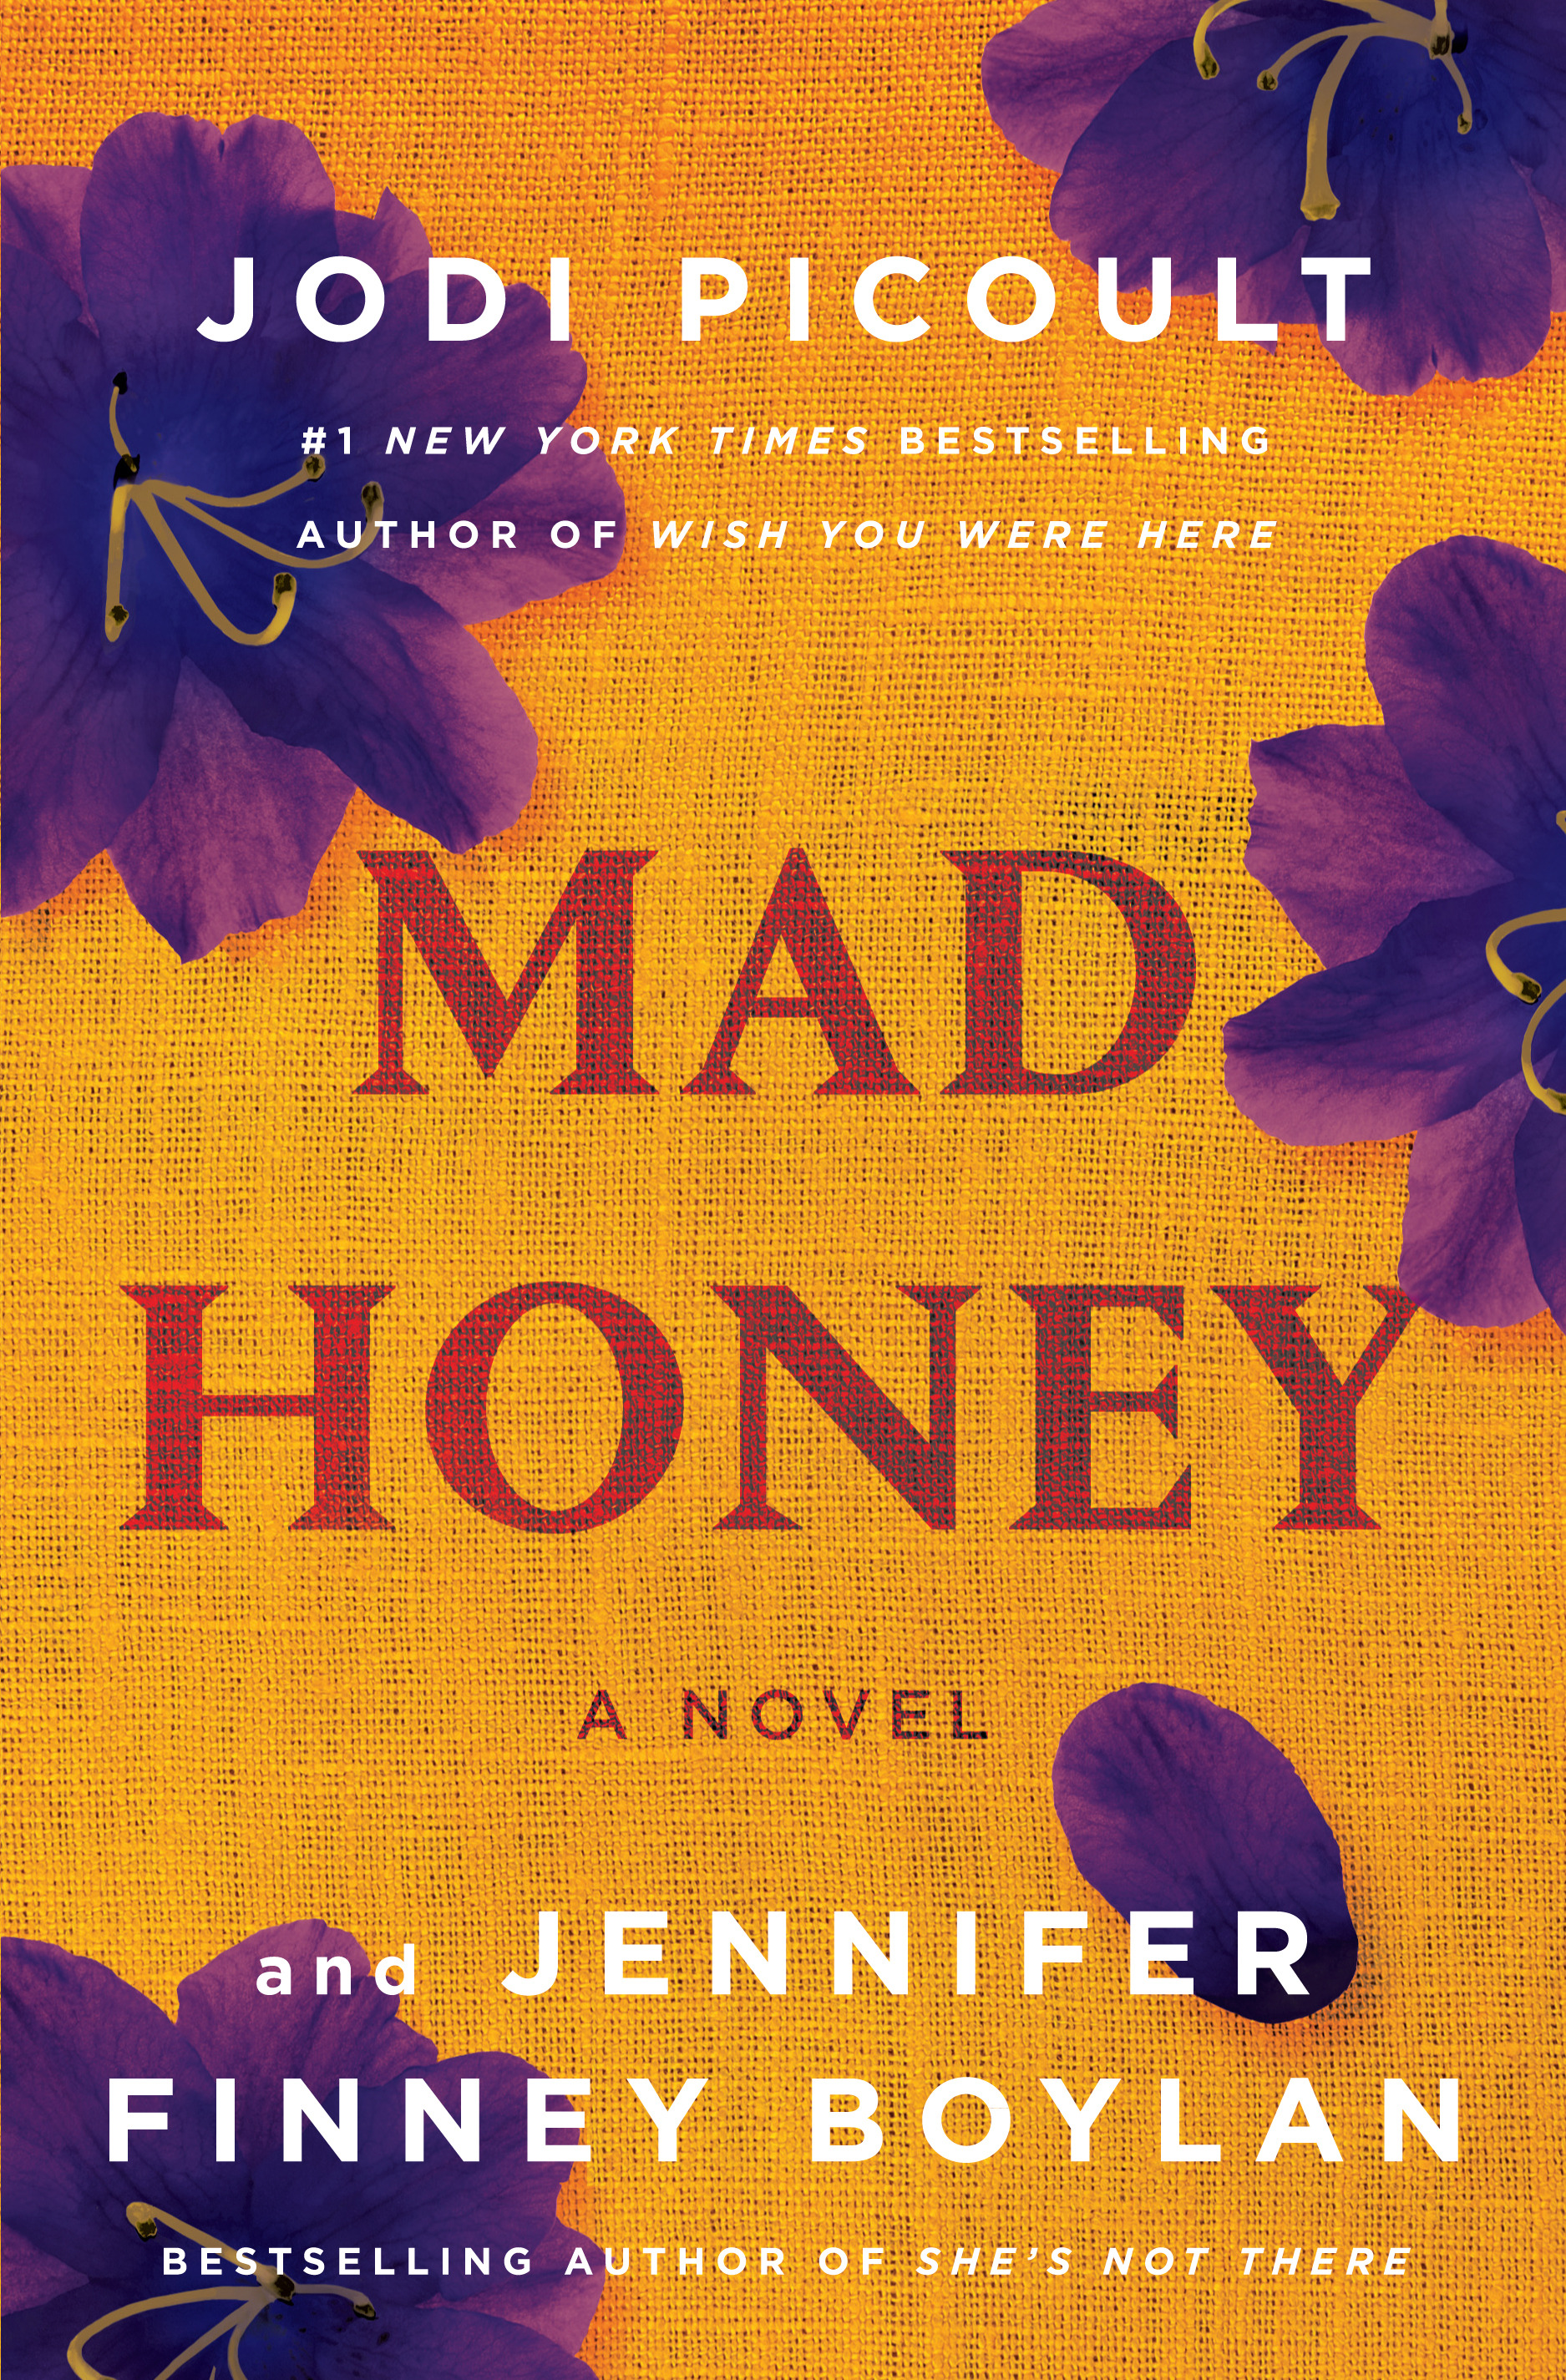 In-Person Event with Jodi Picoult and Jennifer Finney Boylan/Mad Honey